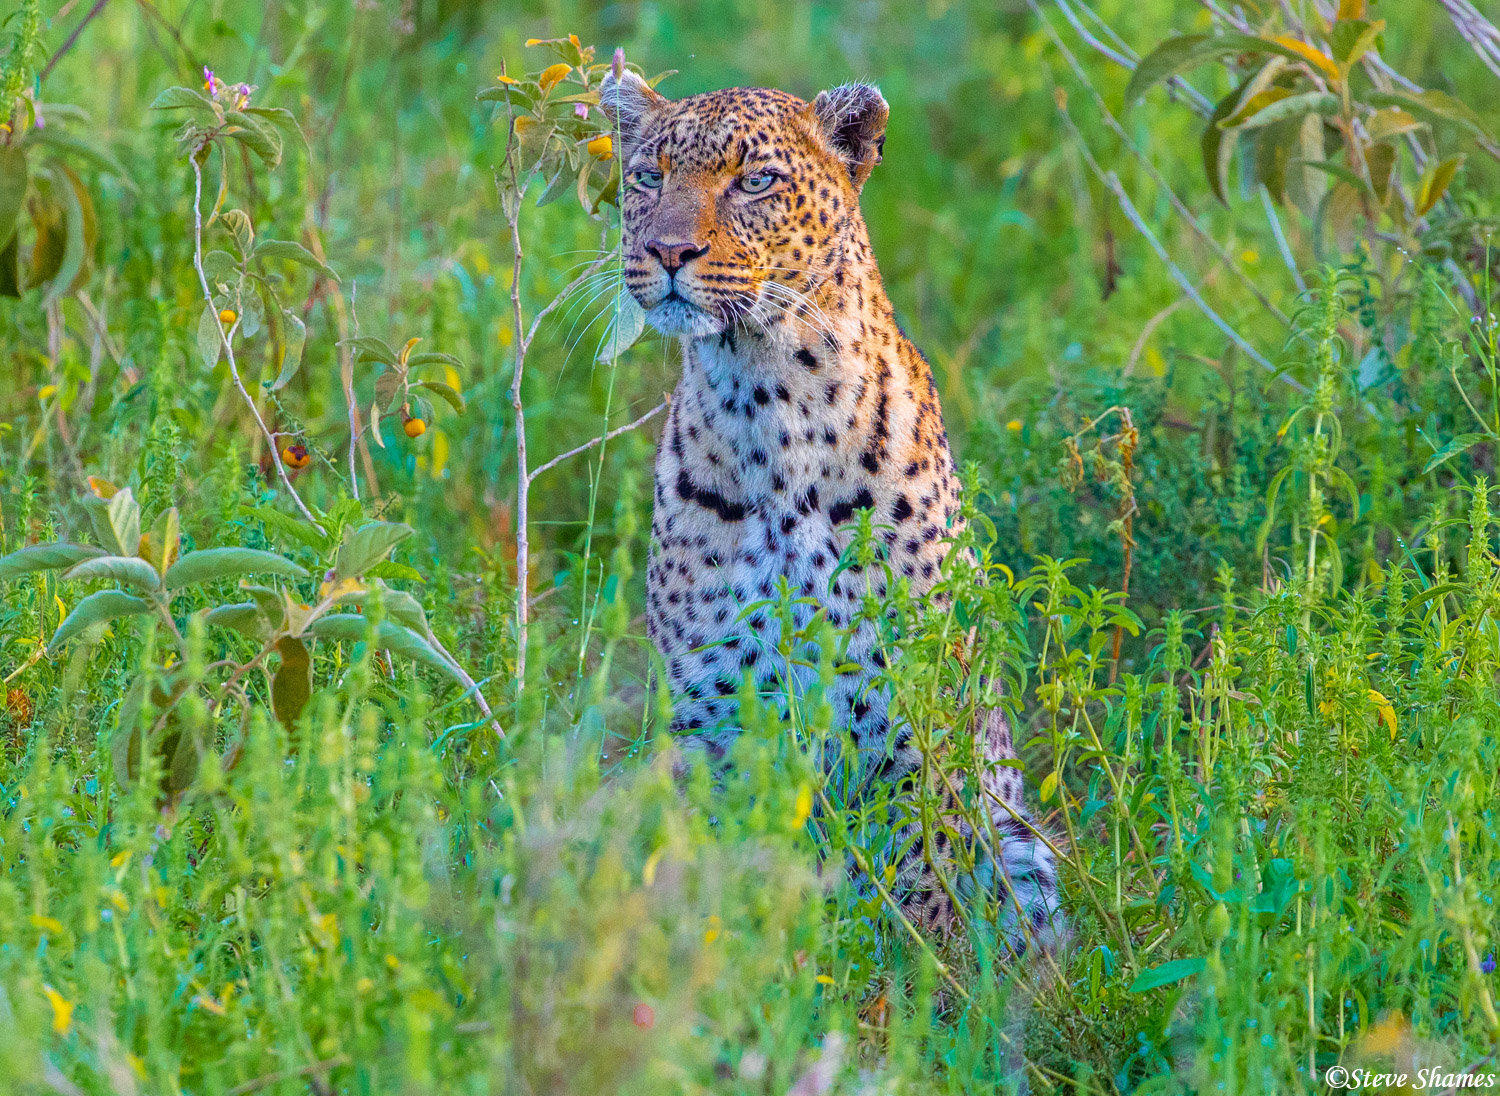 Leopardess on the lookout. There is a big male prowling around that she wants nothing to do with.